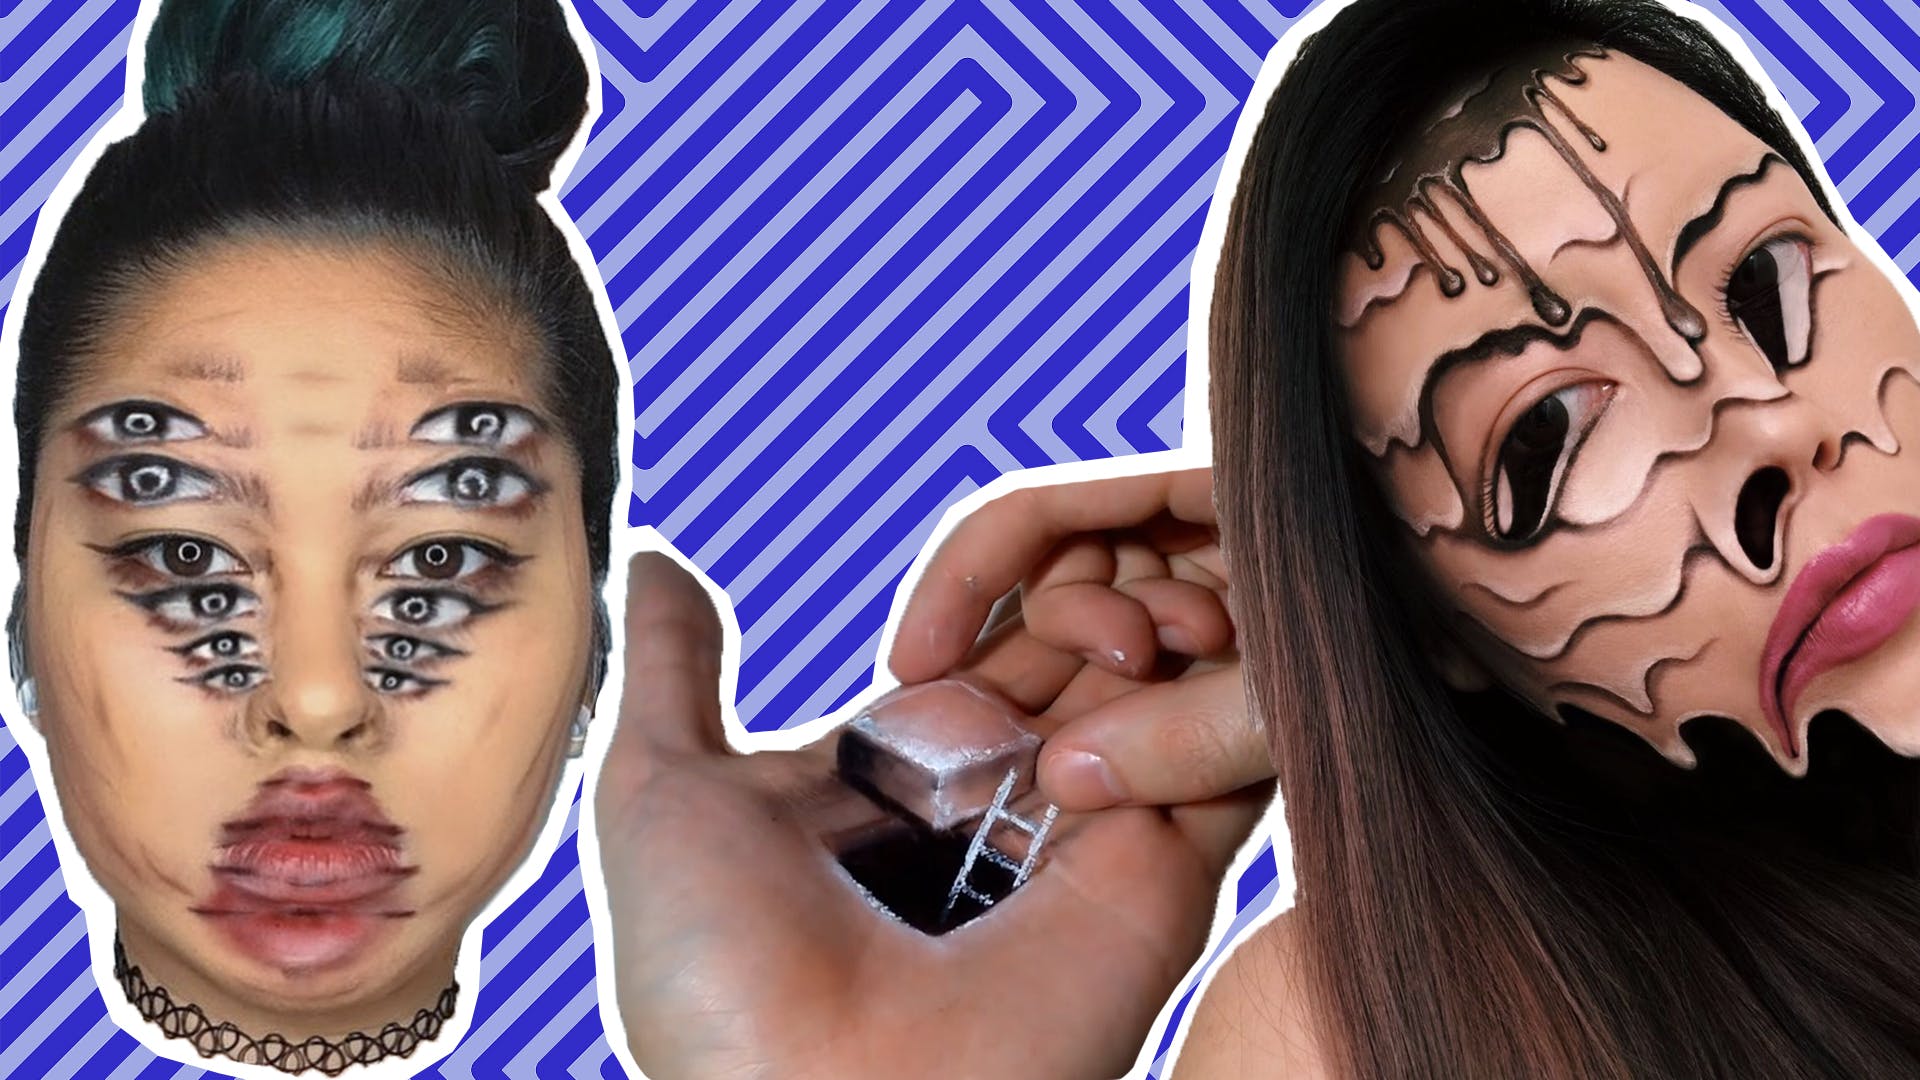 These Awesome Make-up Optical Illusions Will Blow Your Mind!